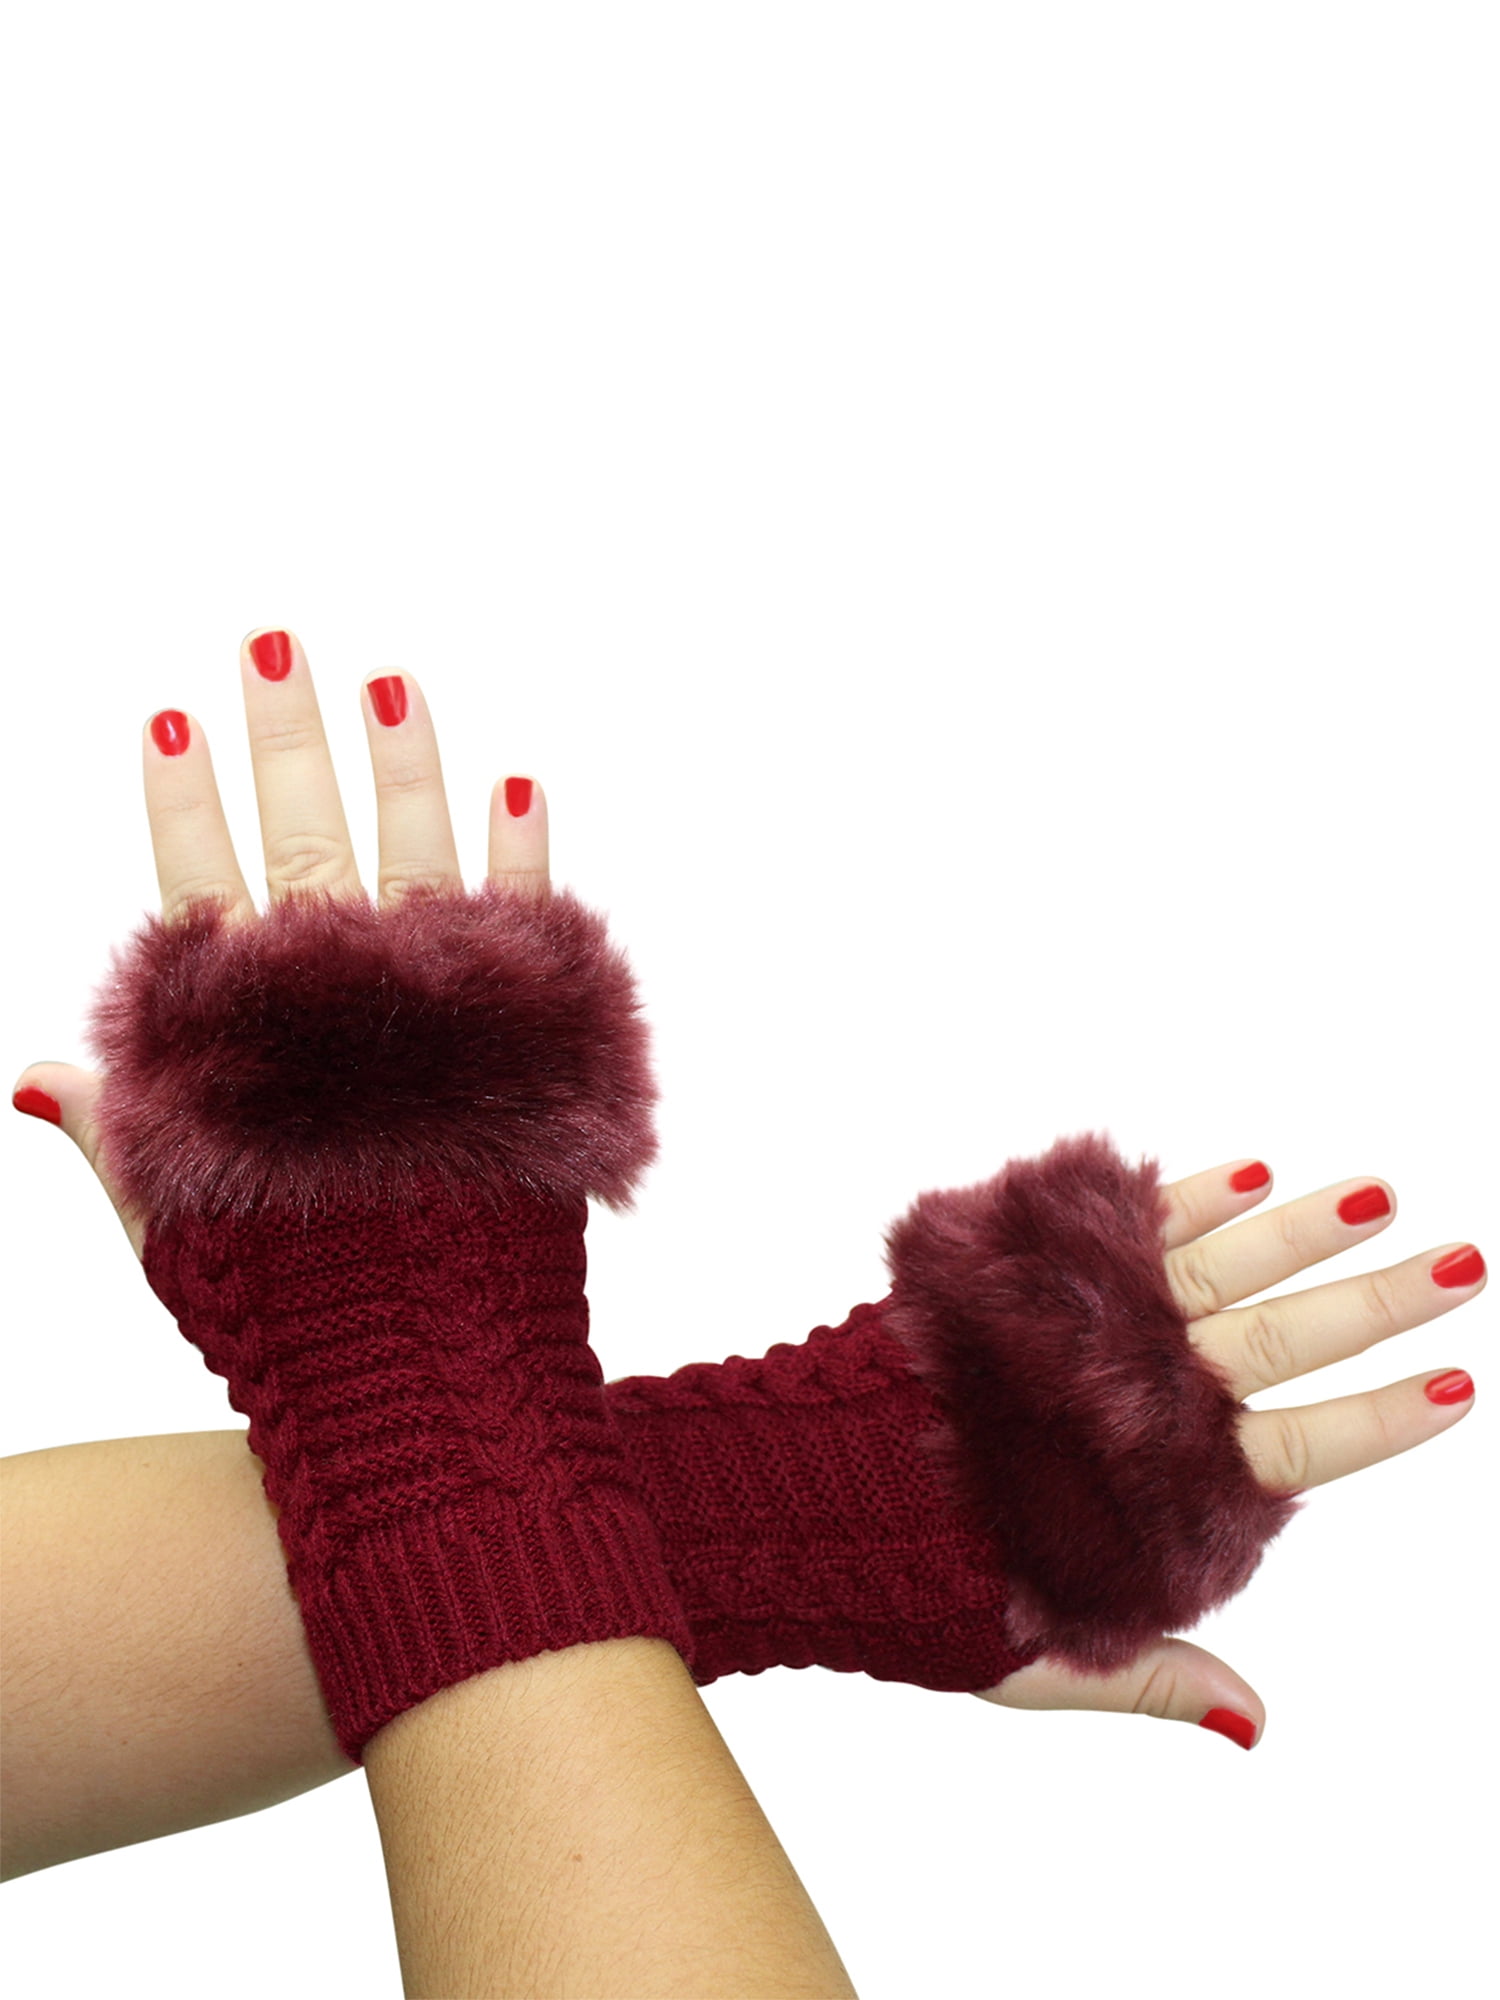 cashmere fingerless gloves  wrist warmers  driving gloves in maroon